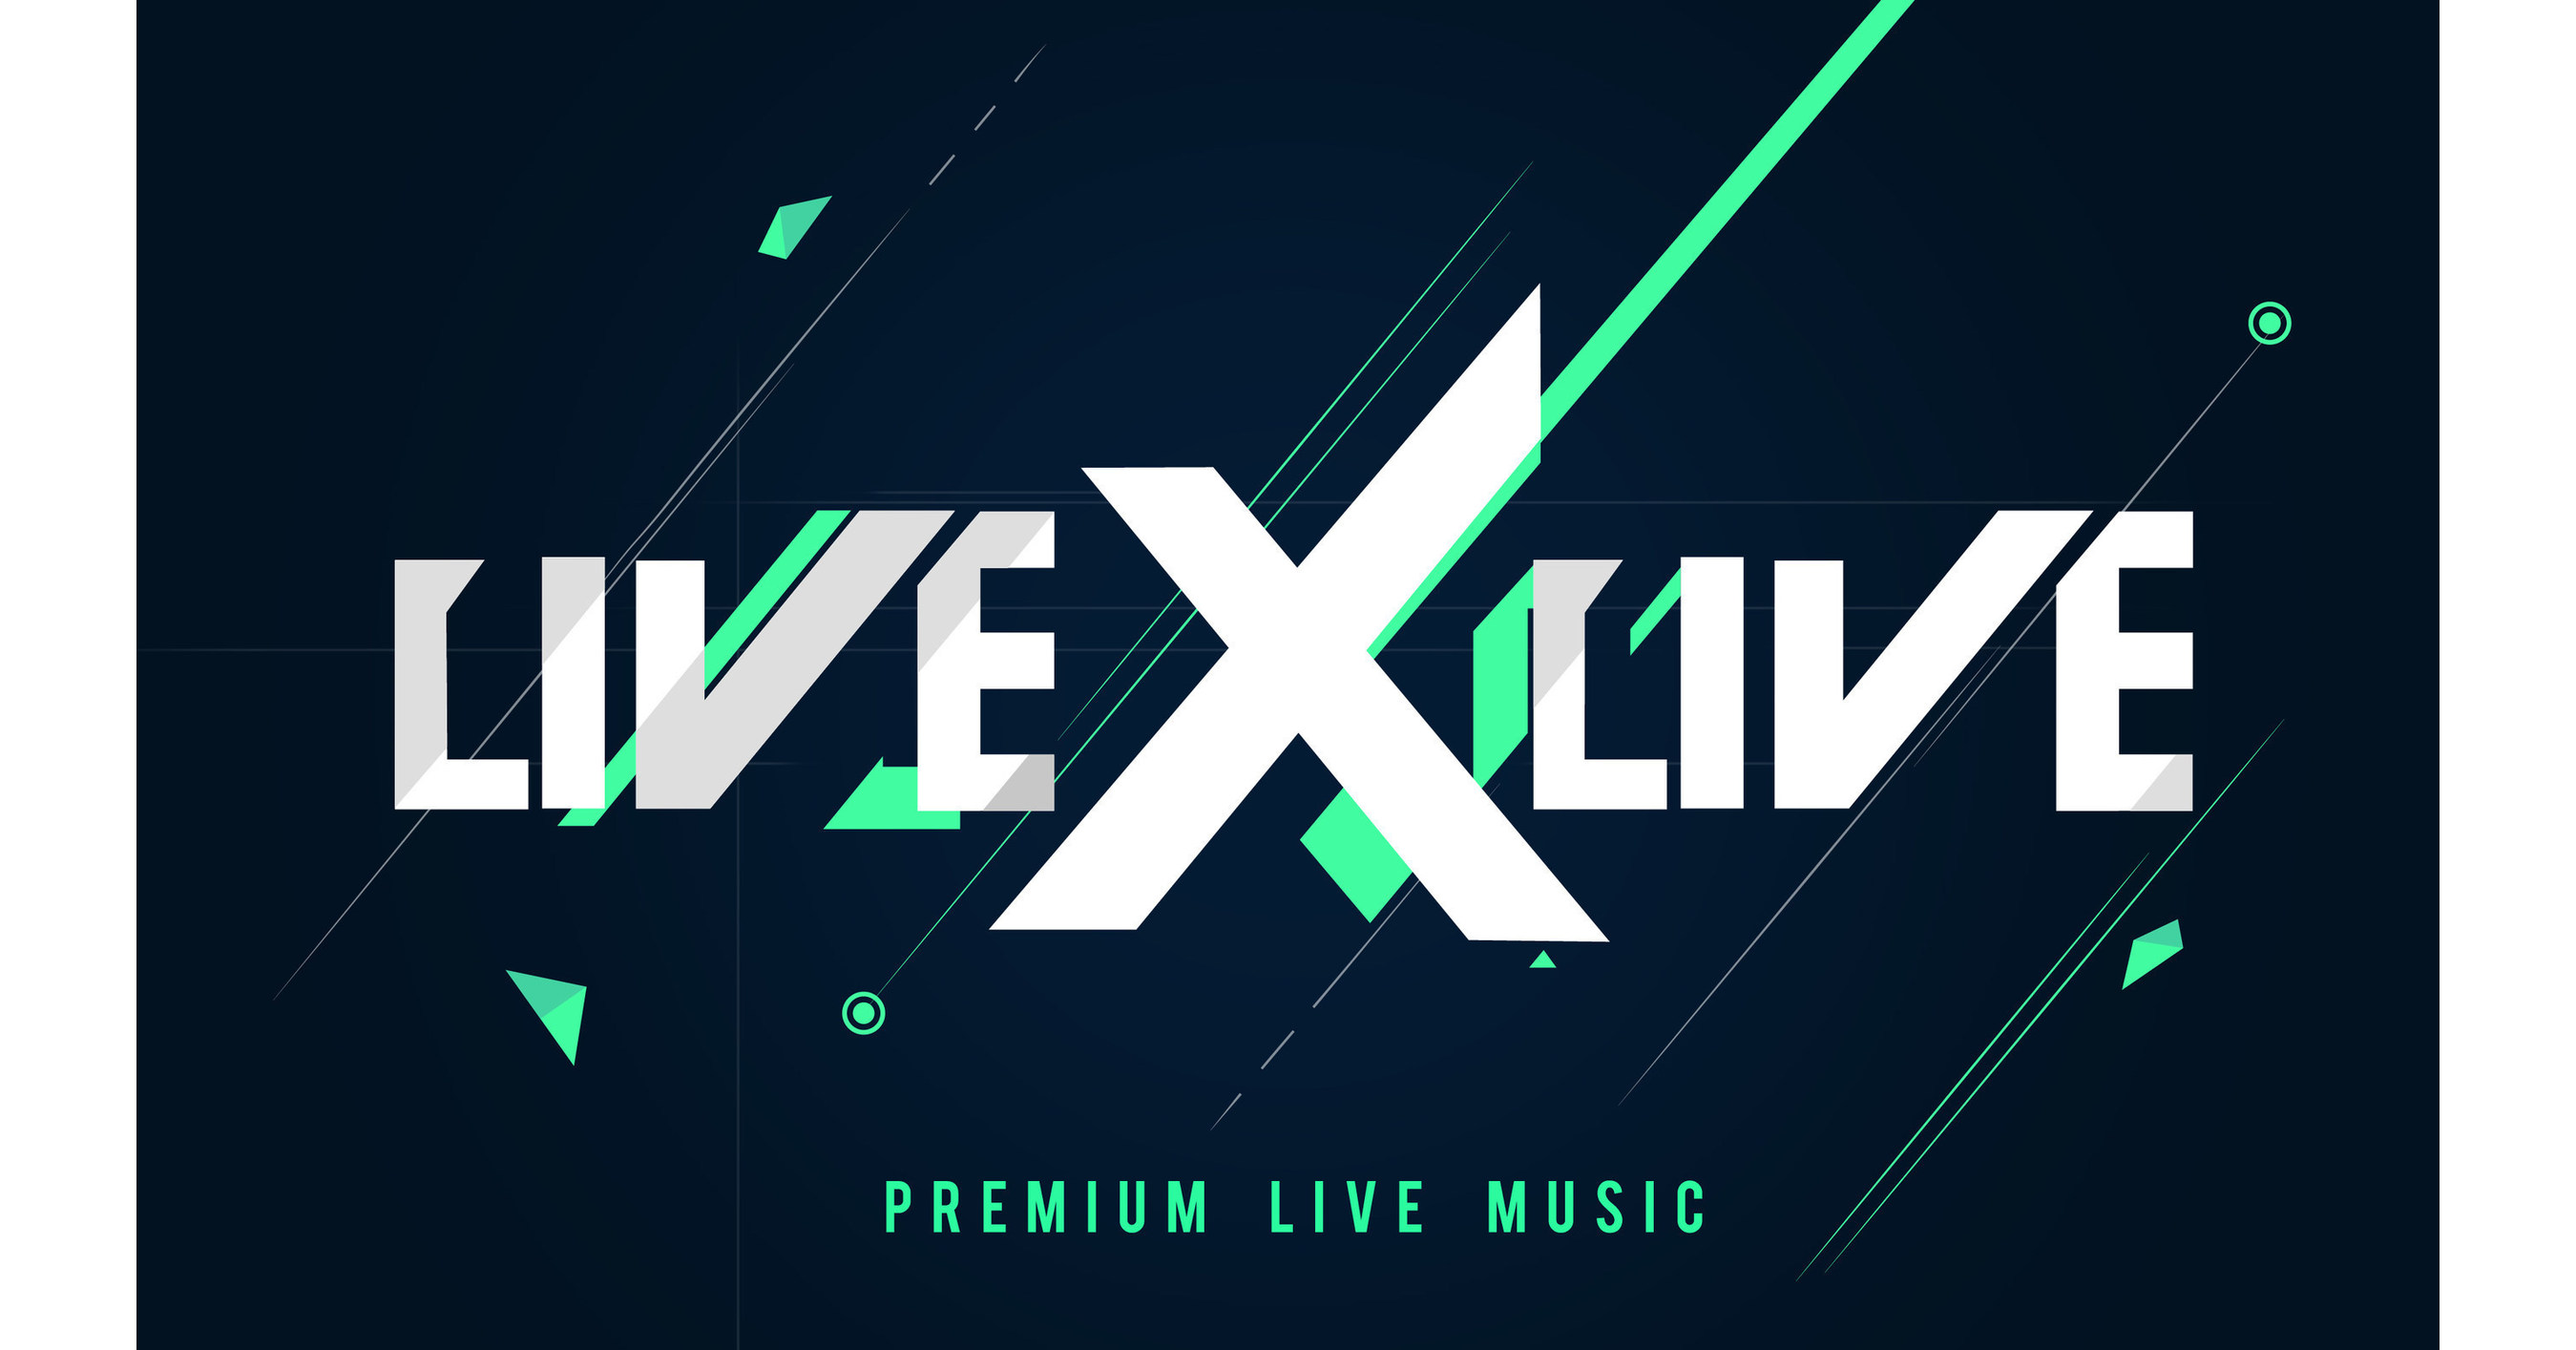 LiveXLive double down, acquiring Slacker Radio and Snap Interactive